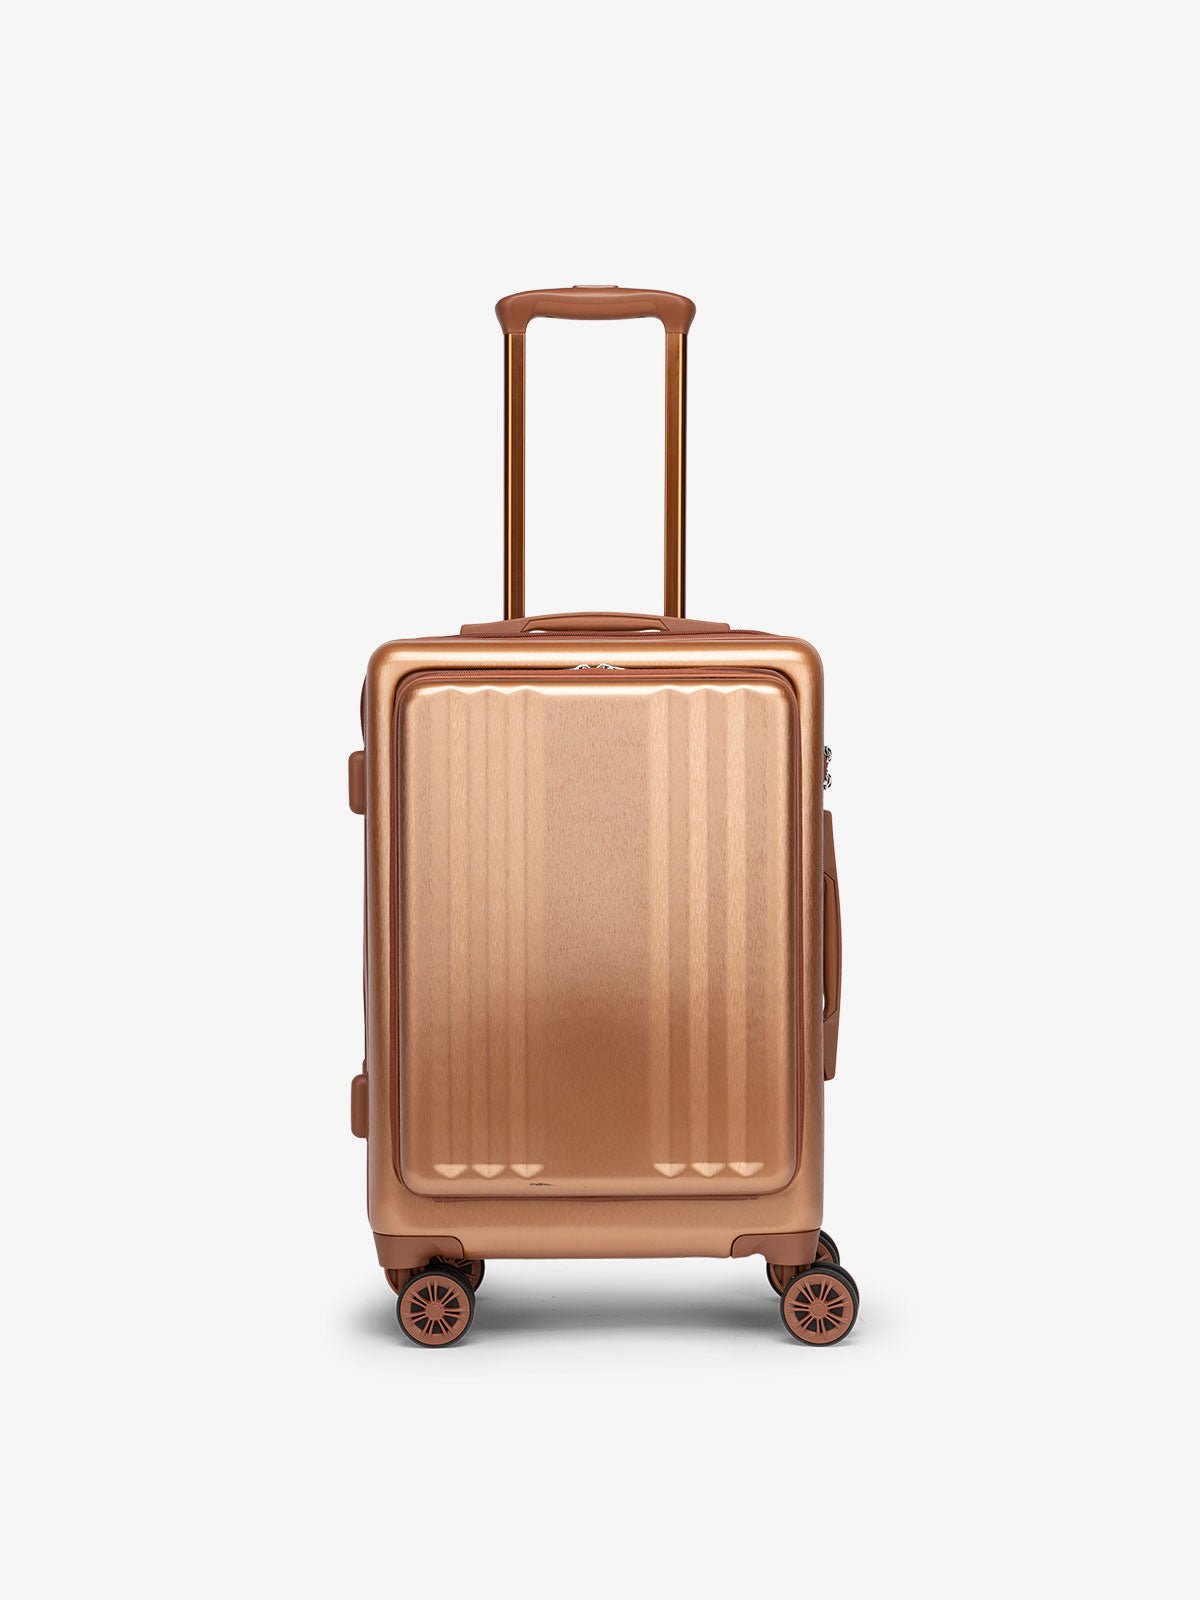 CALPAK Ambeur carry-on suitcase with front pocket, built-in TSA lock and 360 spinner wheels in copper